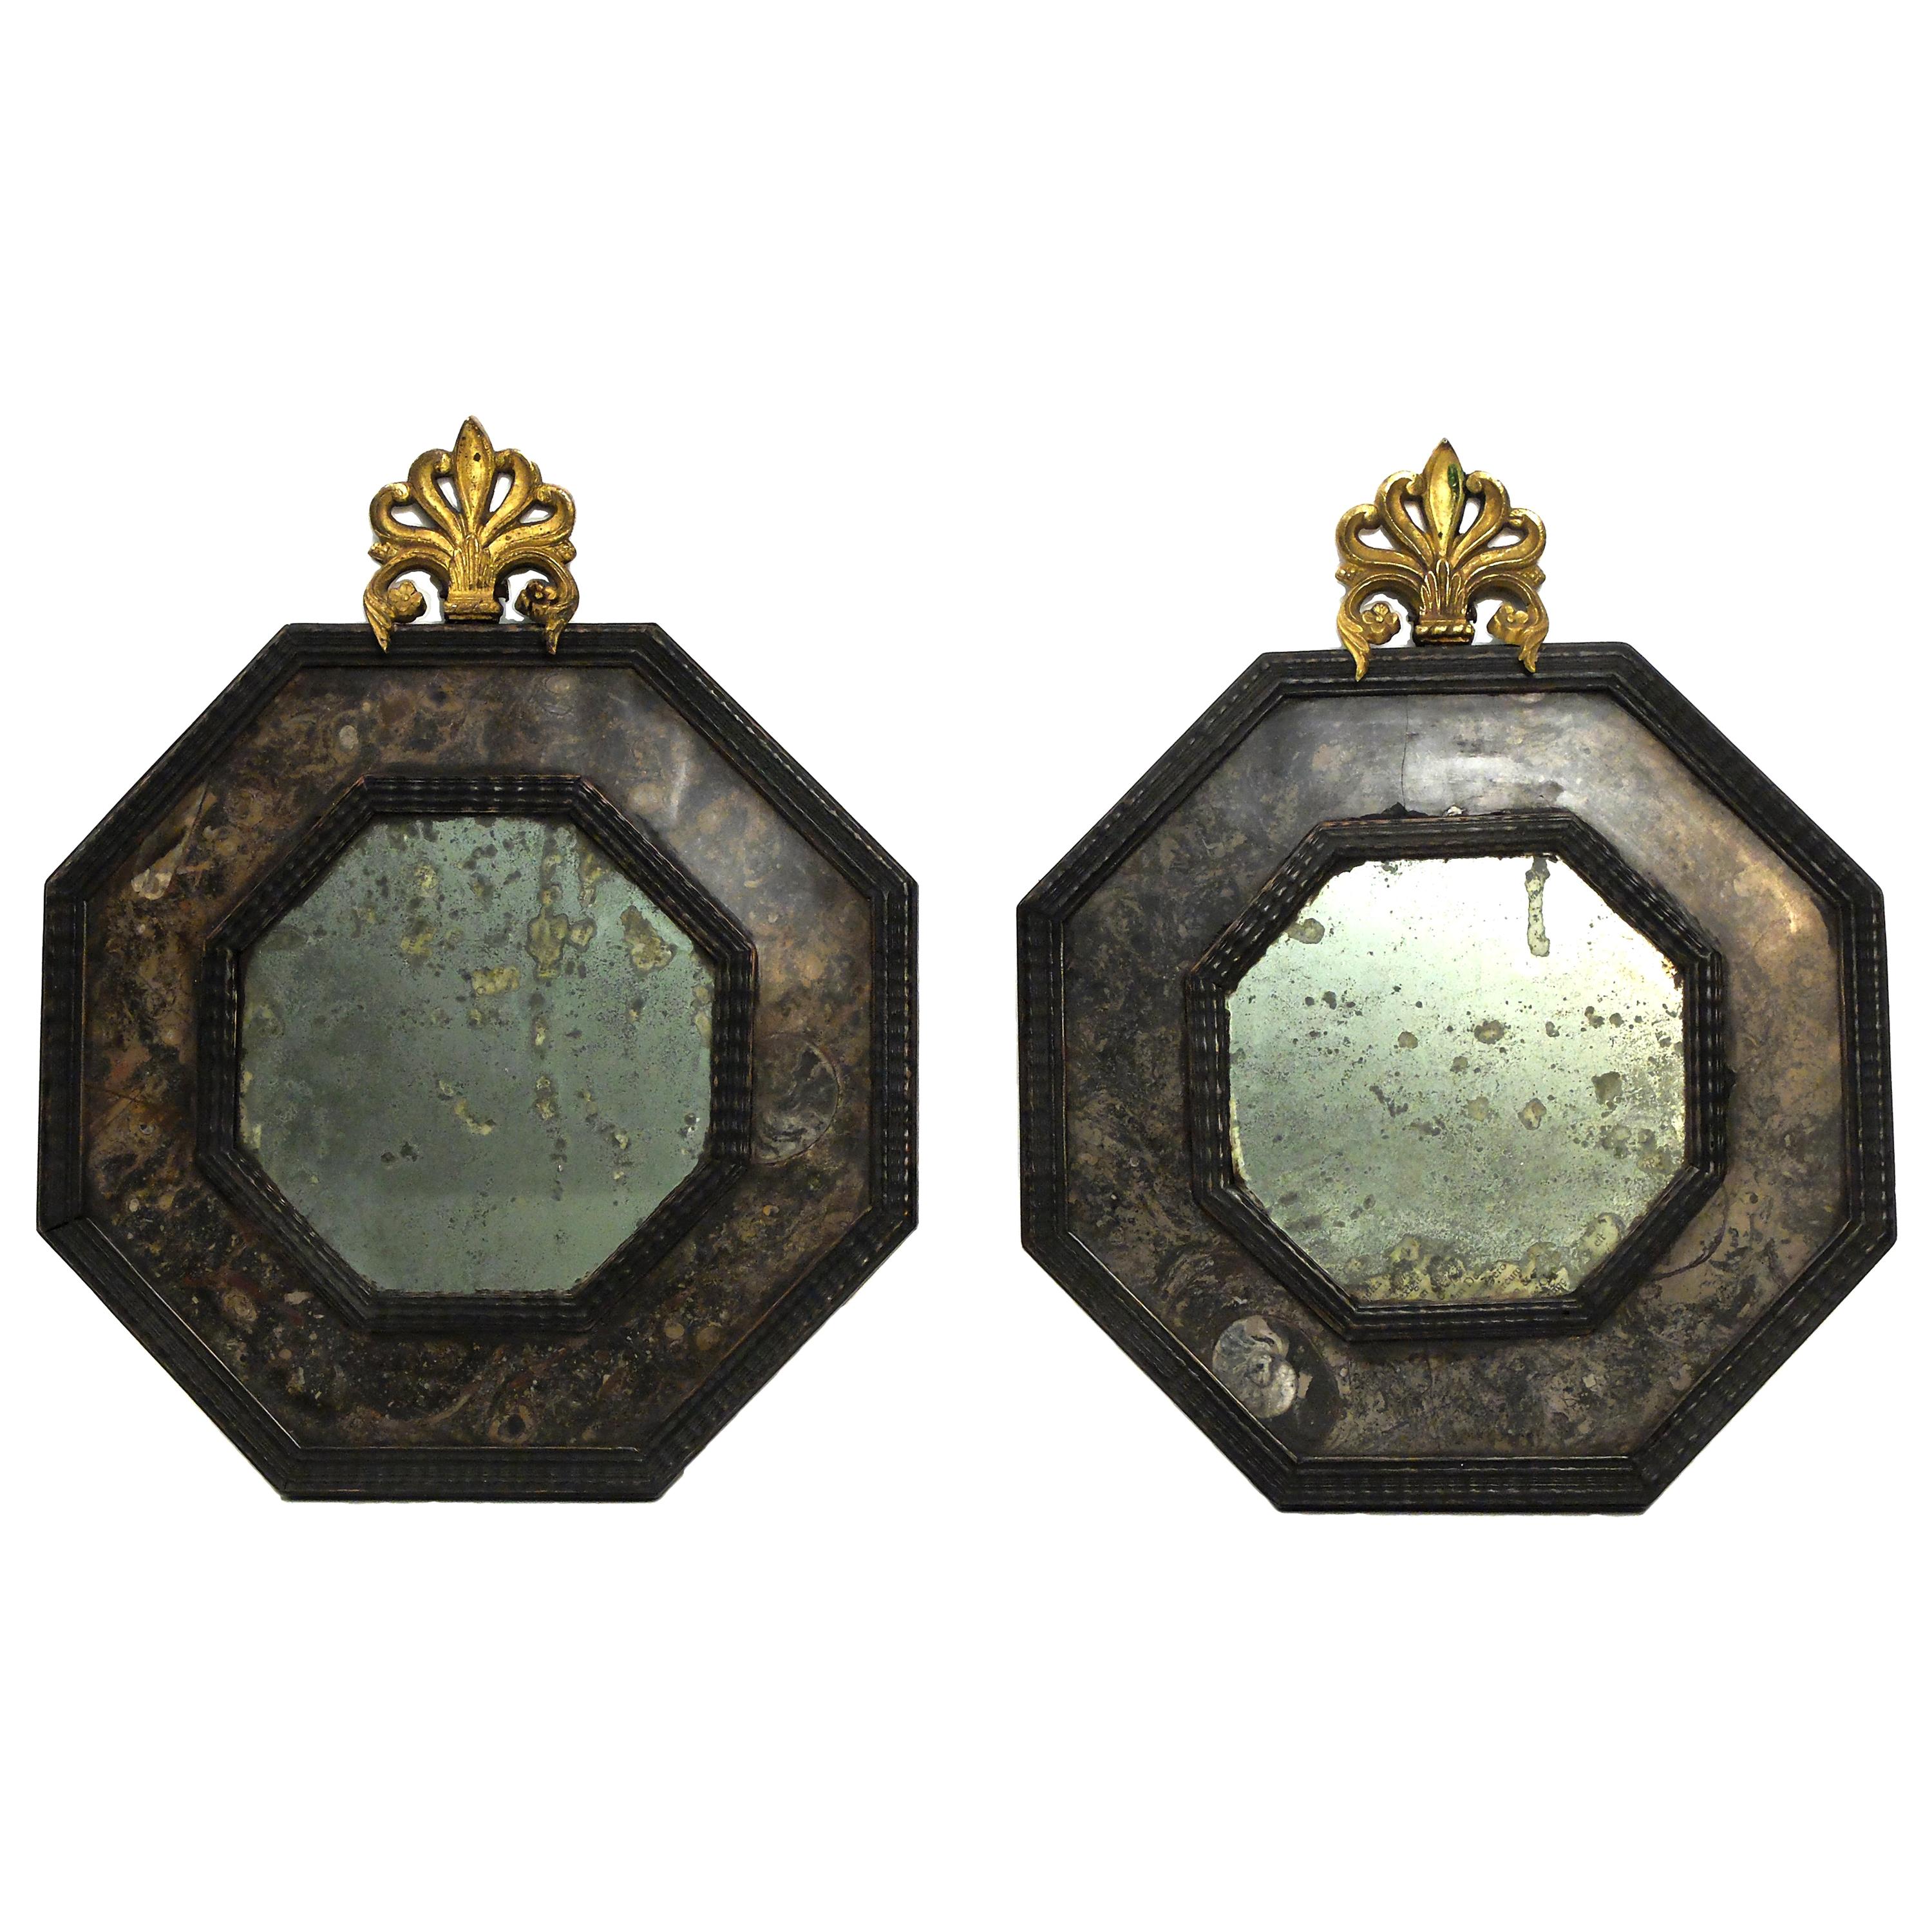 Pair of Italian Early 19th Century Hanging Mirrors Octagonal Shape